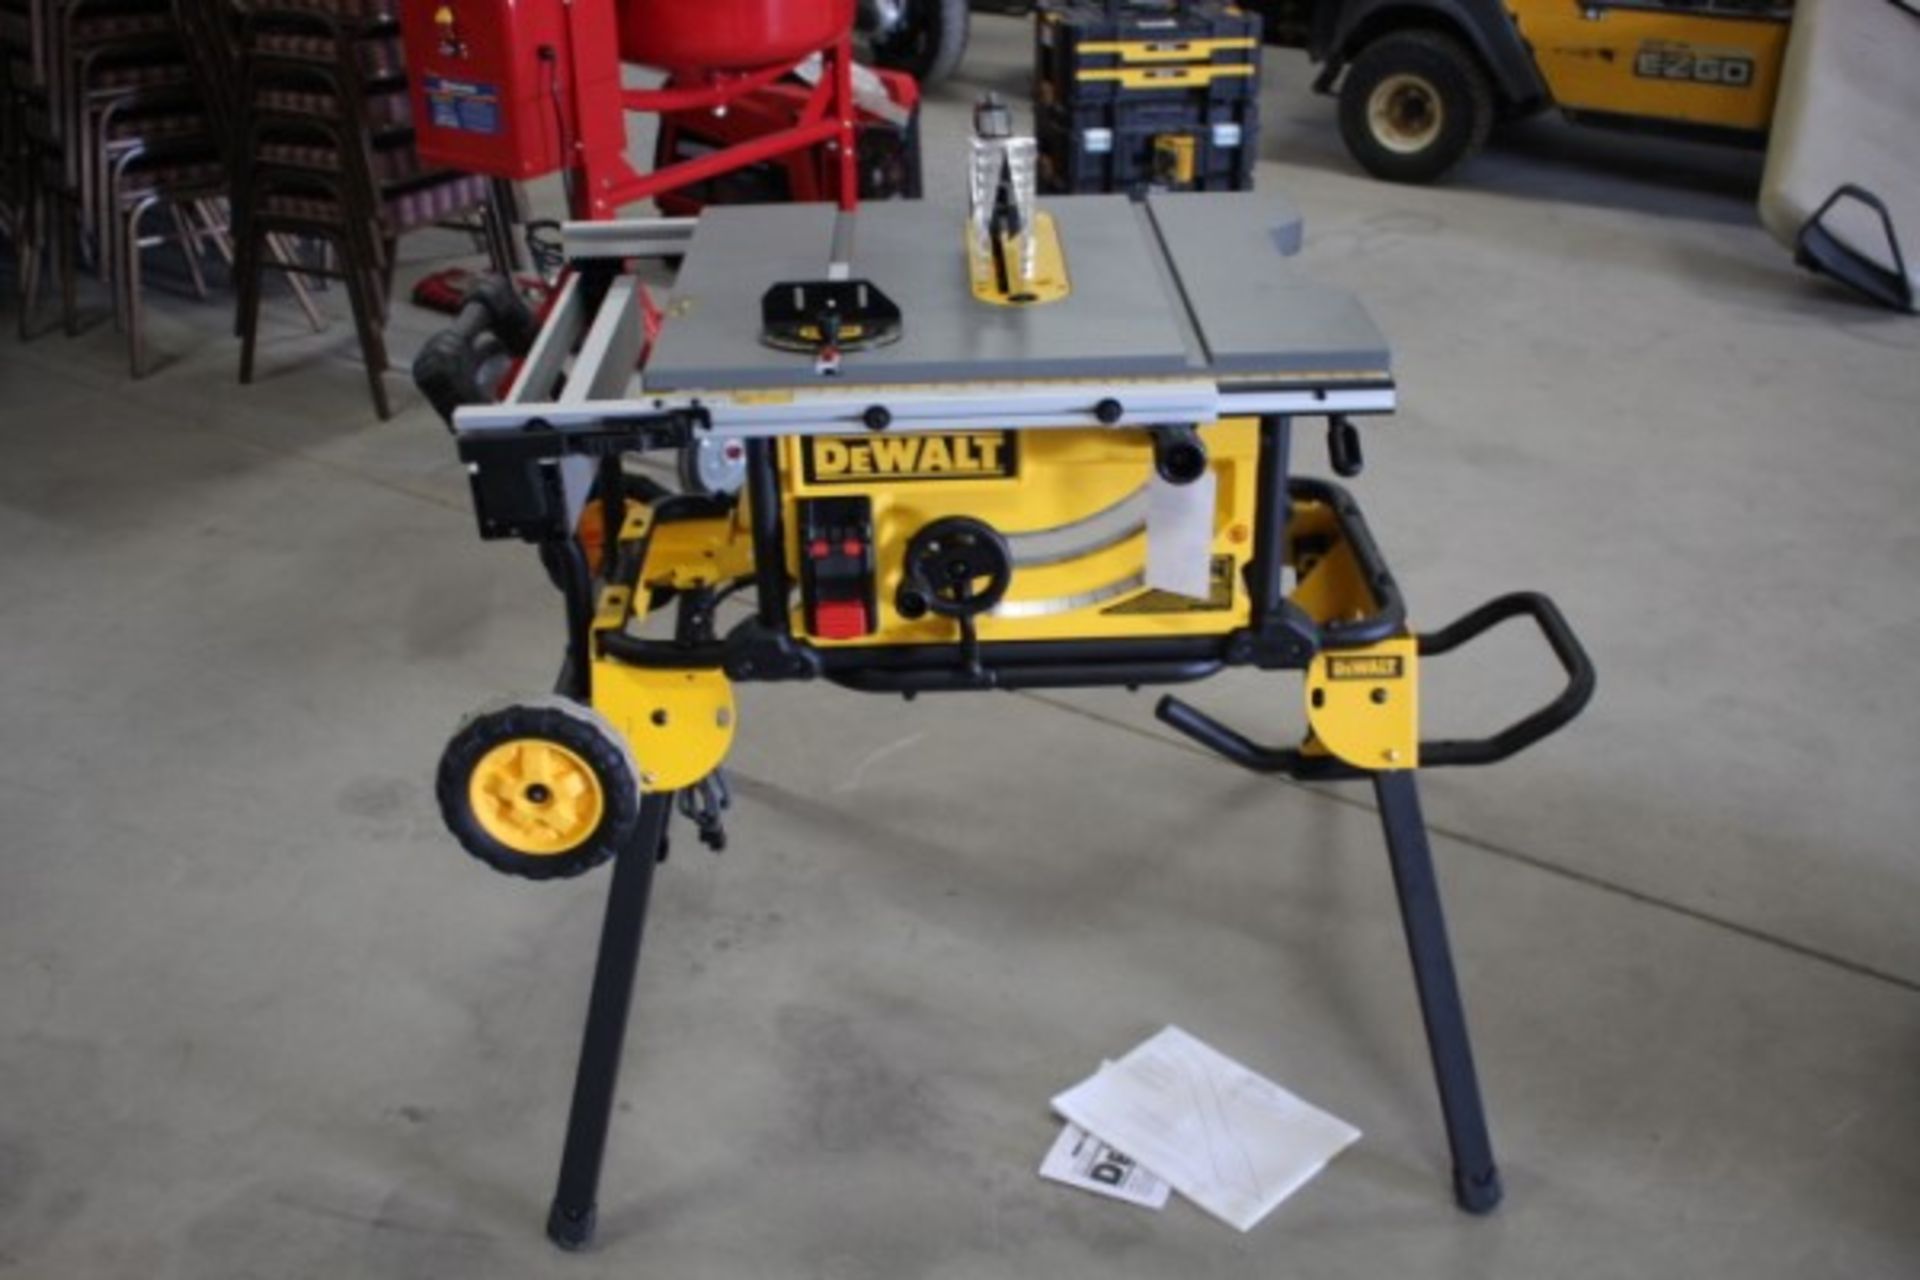 New Dewalt Heavy Duty 10" Job Site Table Saw with Stand - Image 2 of 5